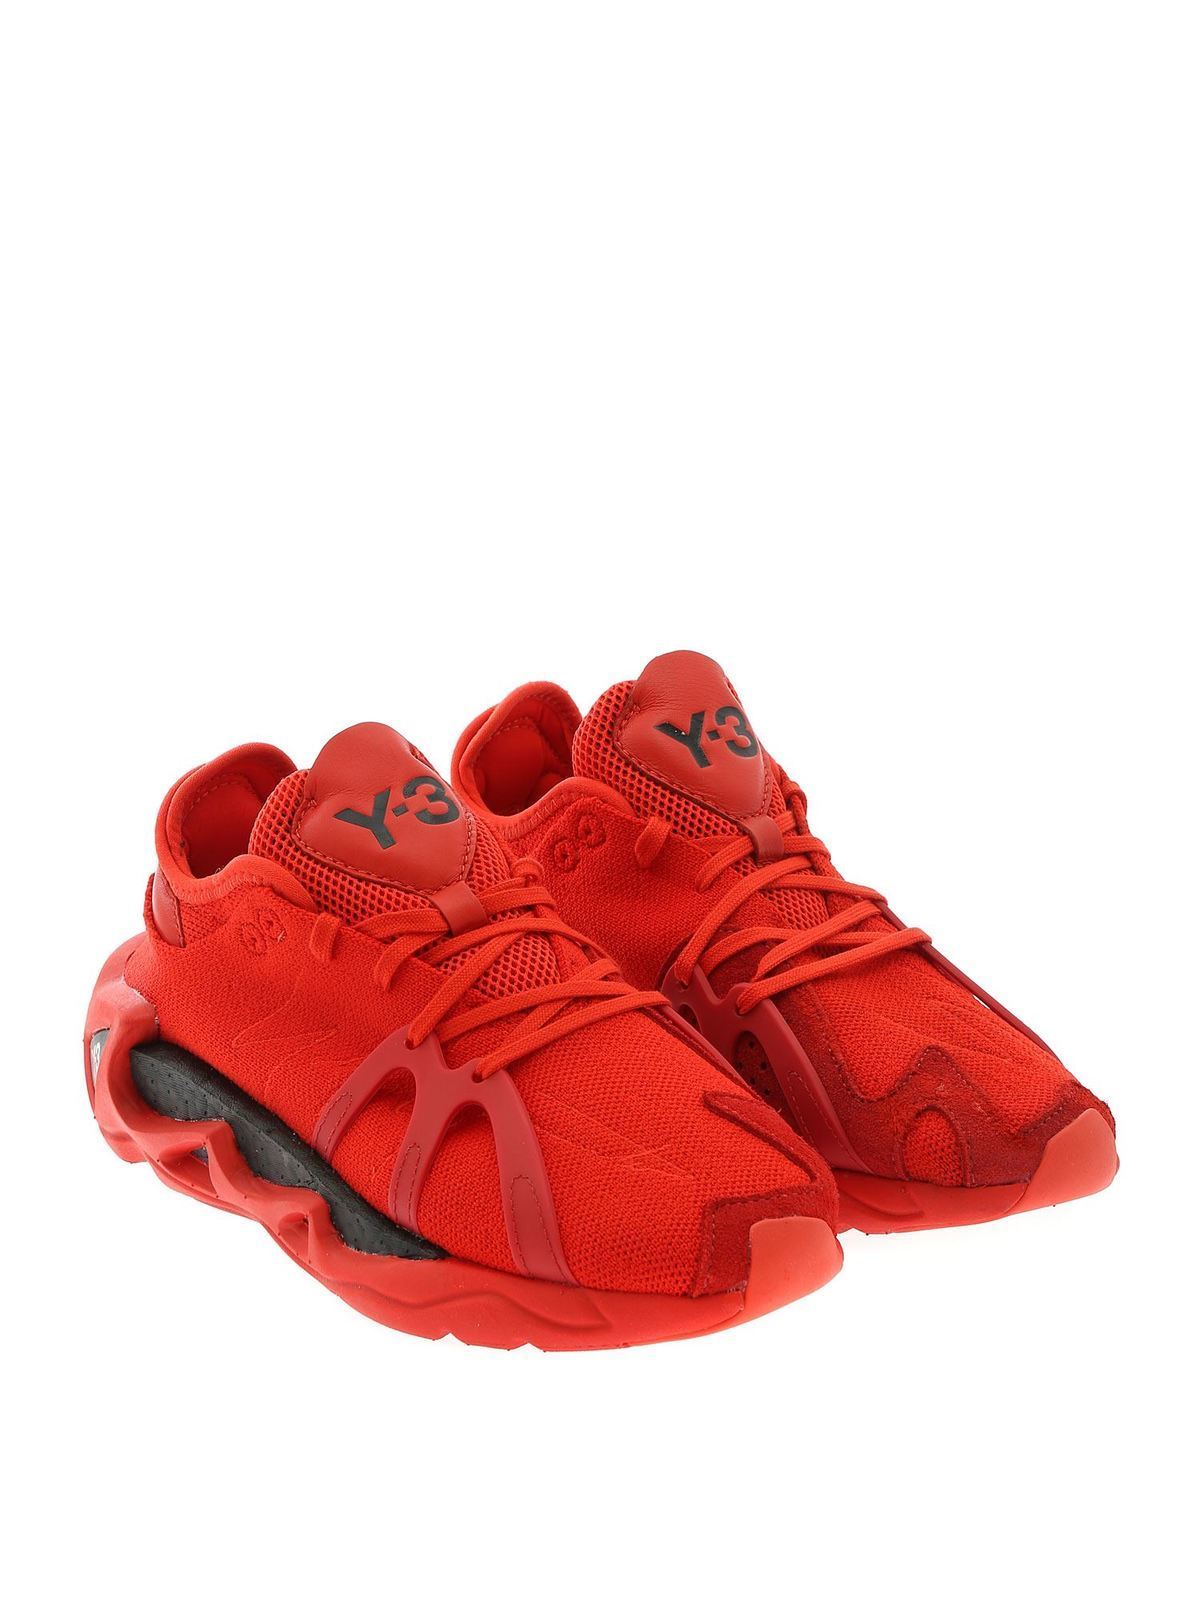 red y3 trainers